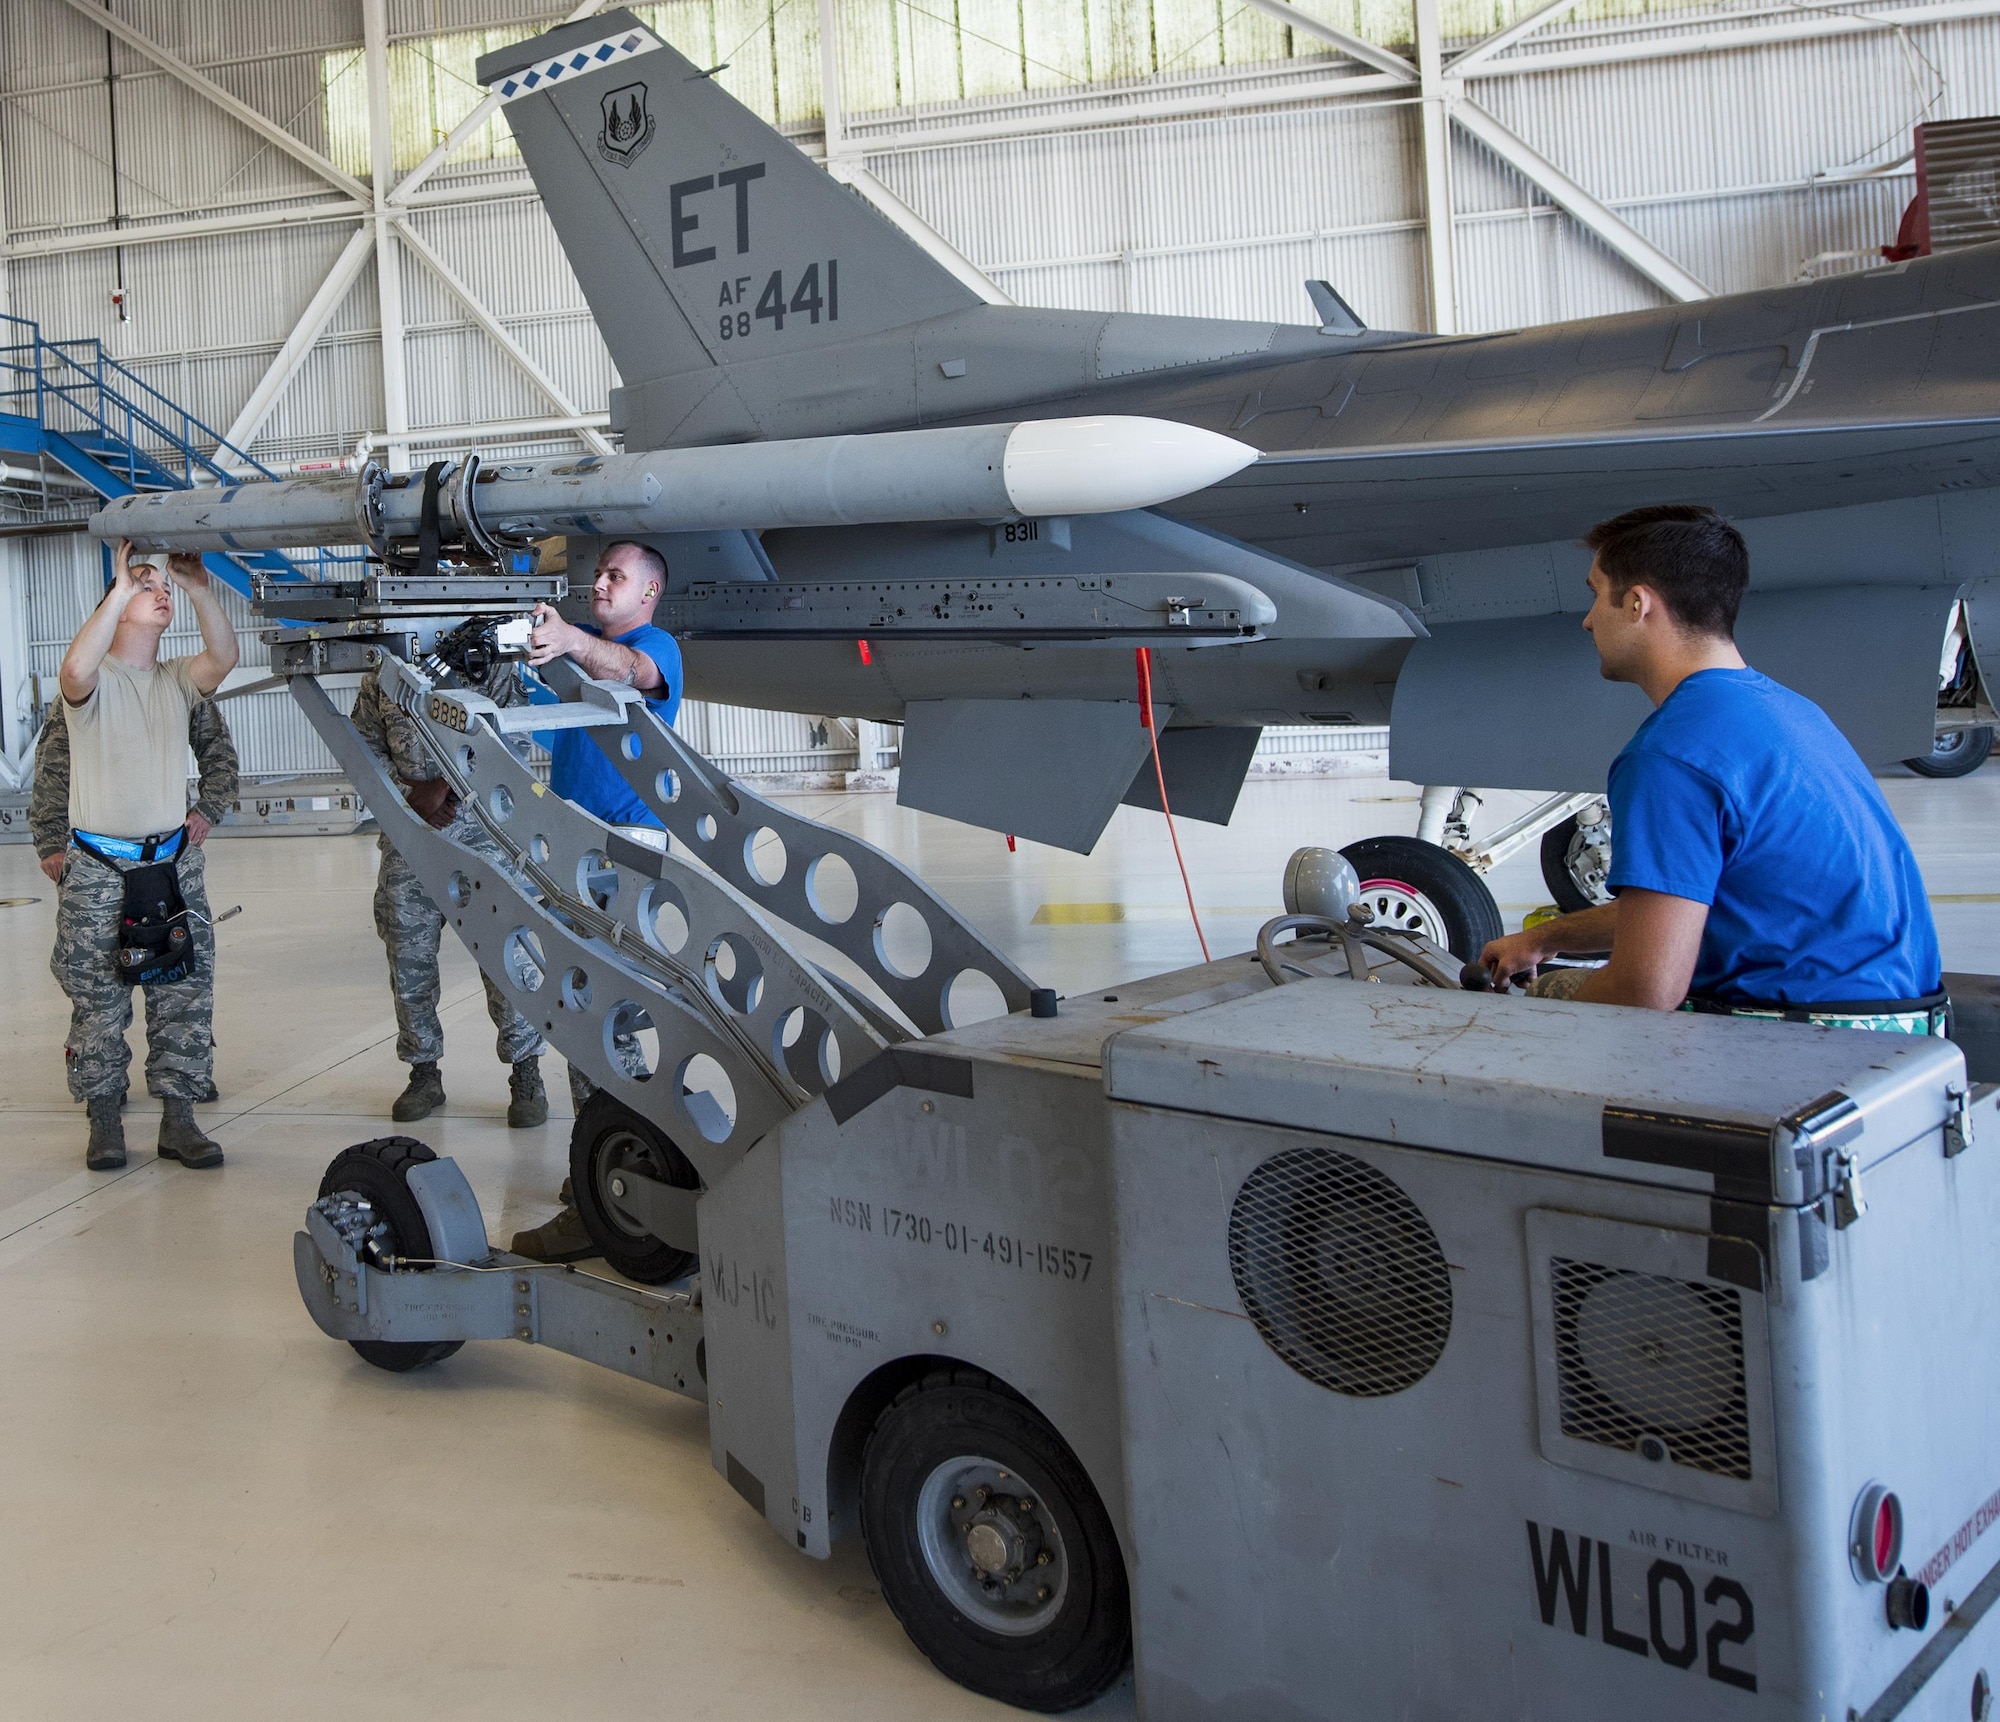 The 96th Aircraft Maintenance Squadron Blue team loads an AIM-120 missile onto their F-16 during the Team Eglin weapons load competition April 7 at Eglin Air Force Base, Fla.  Teams from the 96th Test Wing and 33rd Fighter Wing competed to see who could load up two weapons onto their designated aircraft the quickest and with the fewest errors.  The 33rd FW team repeated as base champion.  (U.S. Air Force photo/Samuel King Jr.)